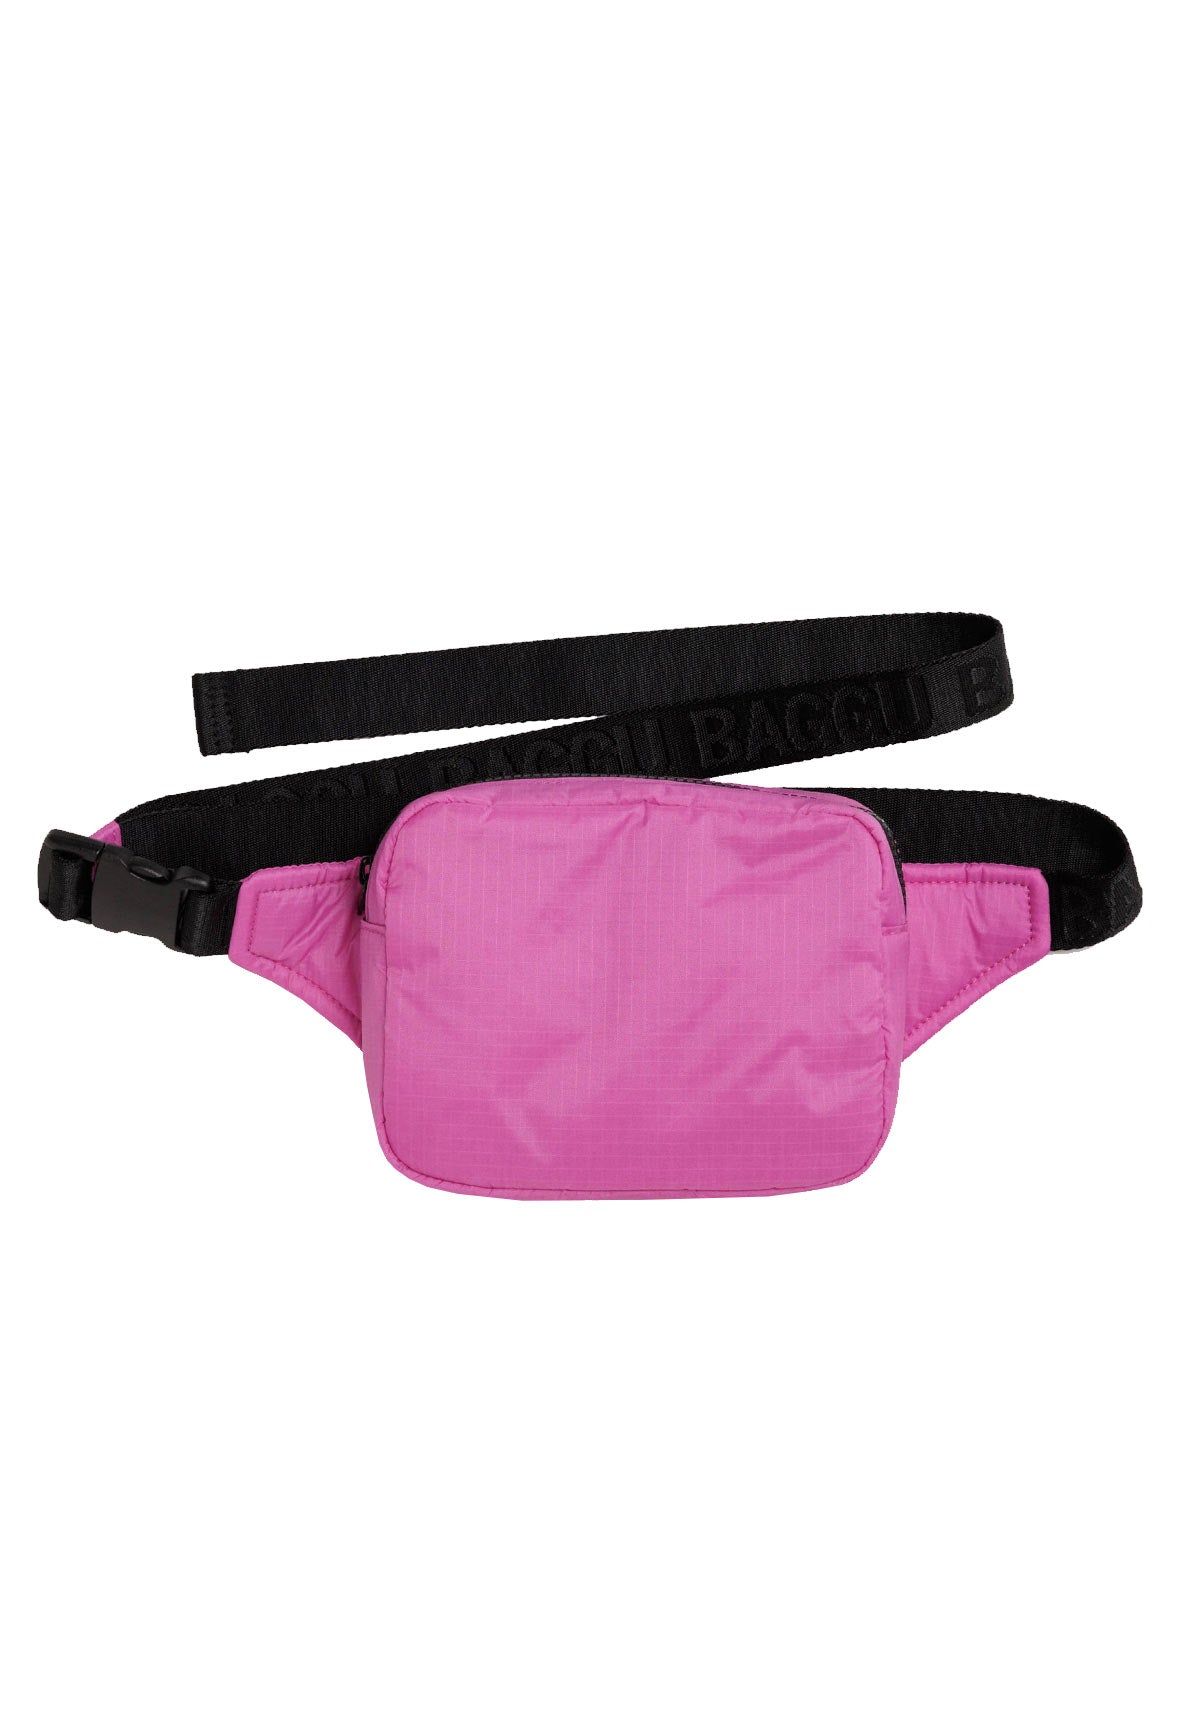 PUFFY FANNY PACK - Moeon